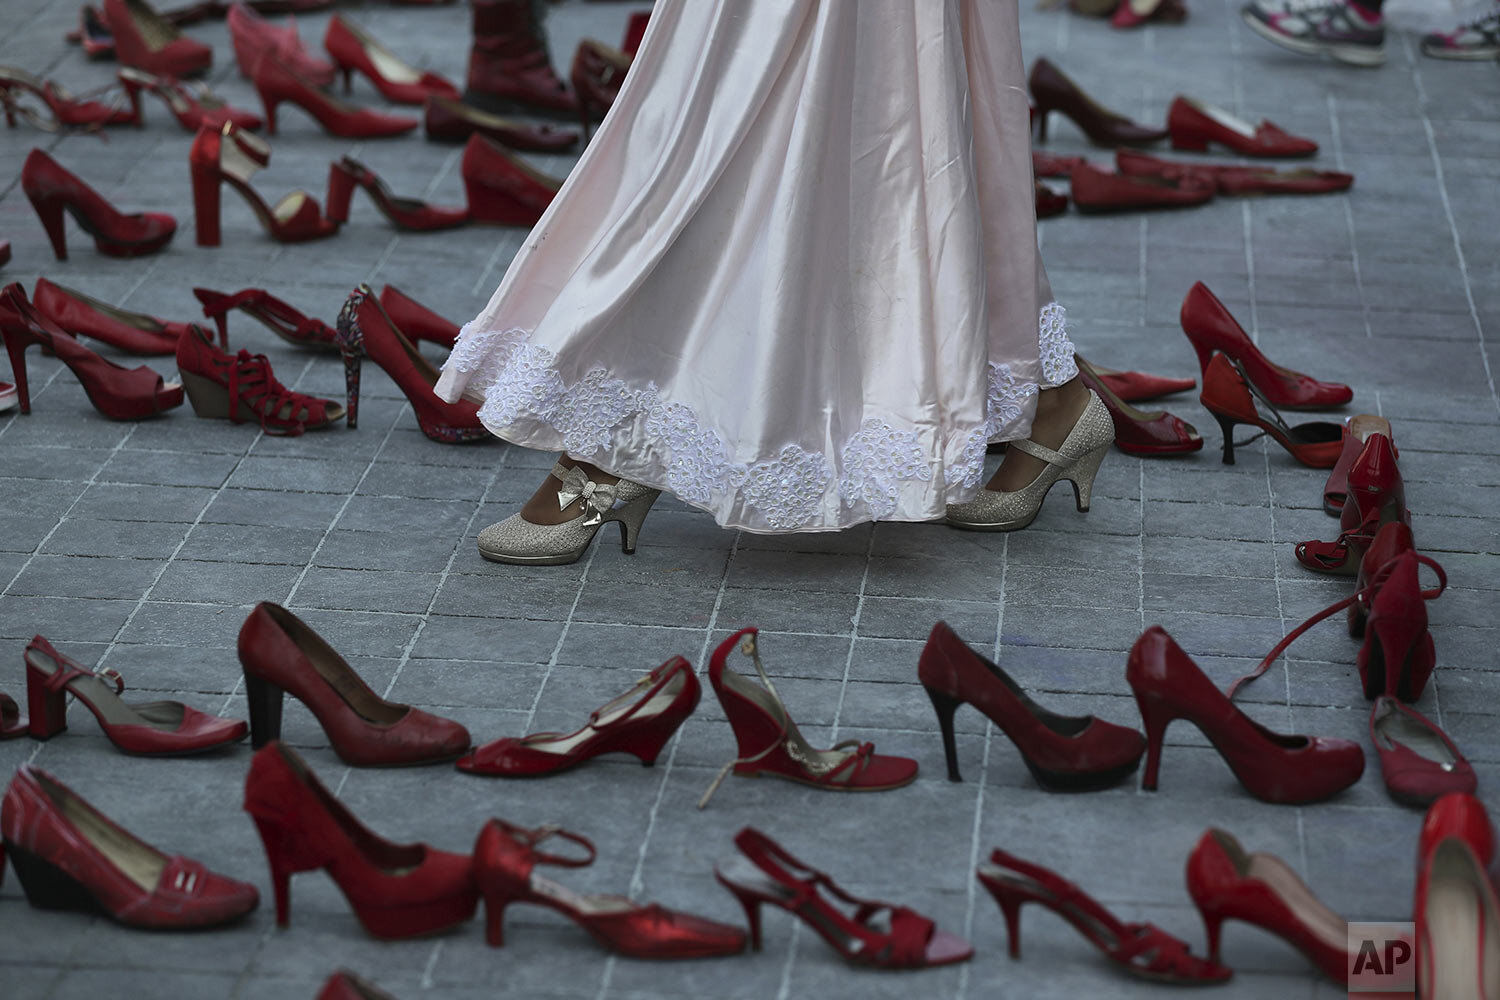  An actress walks amid red shoes representing murdered women during a performance on International Women's Day, coined "A Day Without Women" in Mexico City, March 9, 2020. Women across Mexico went on strike to protest rampant gender violence. (AP Pho